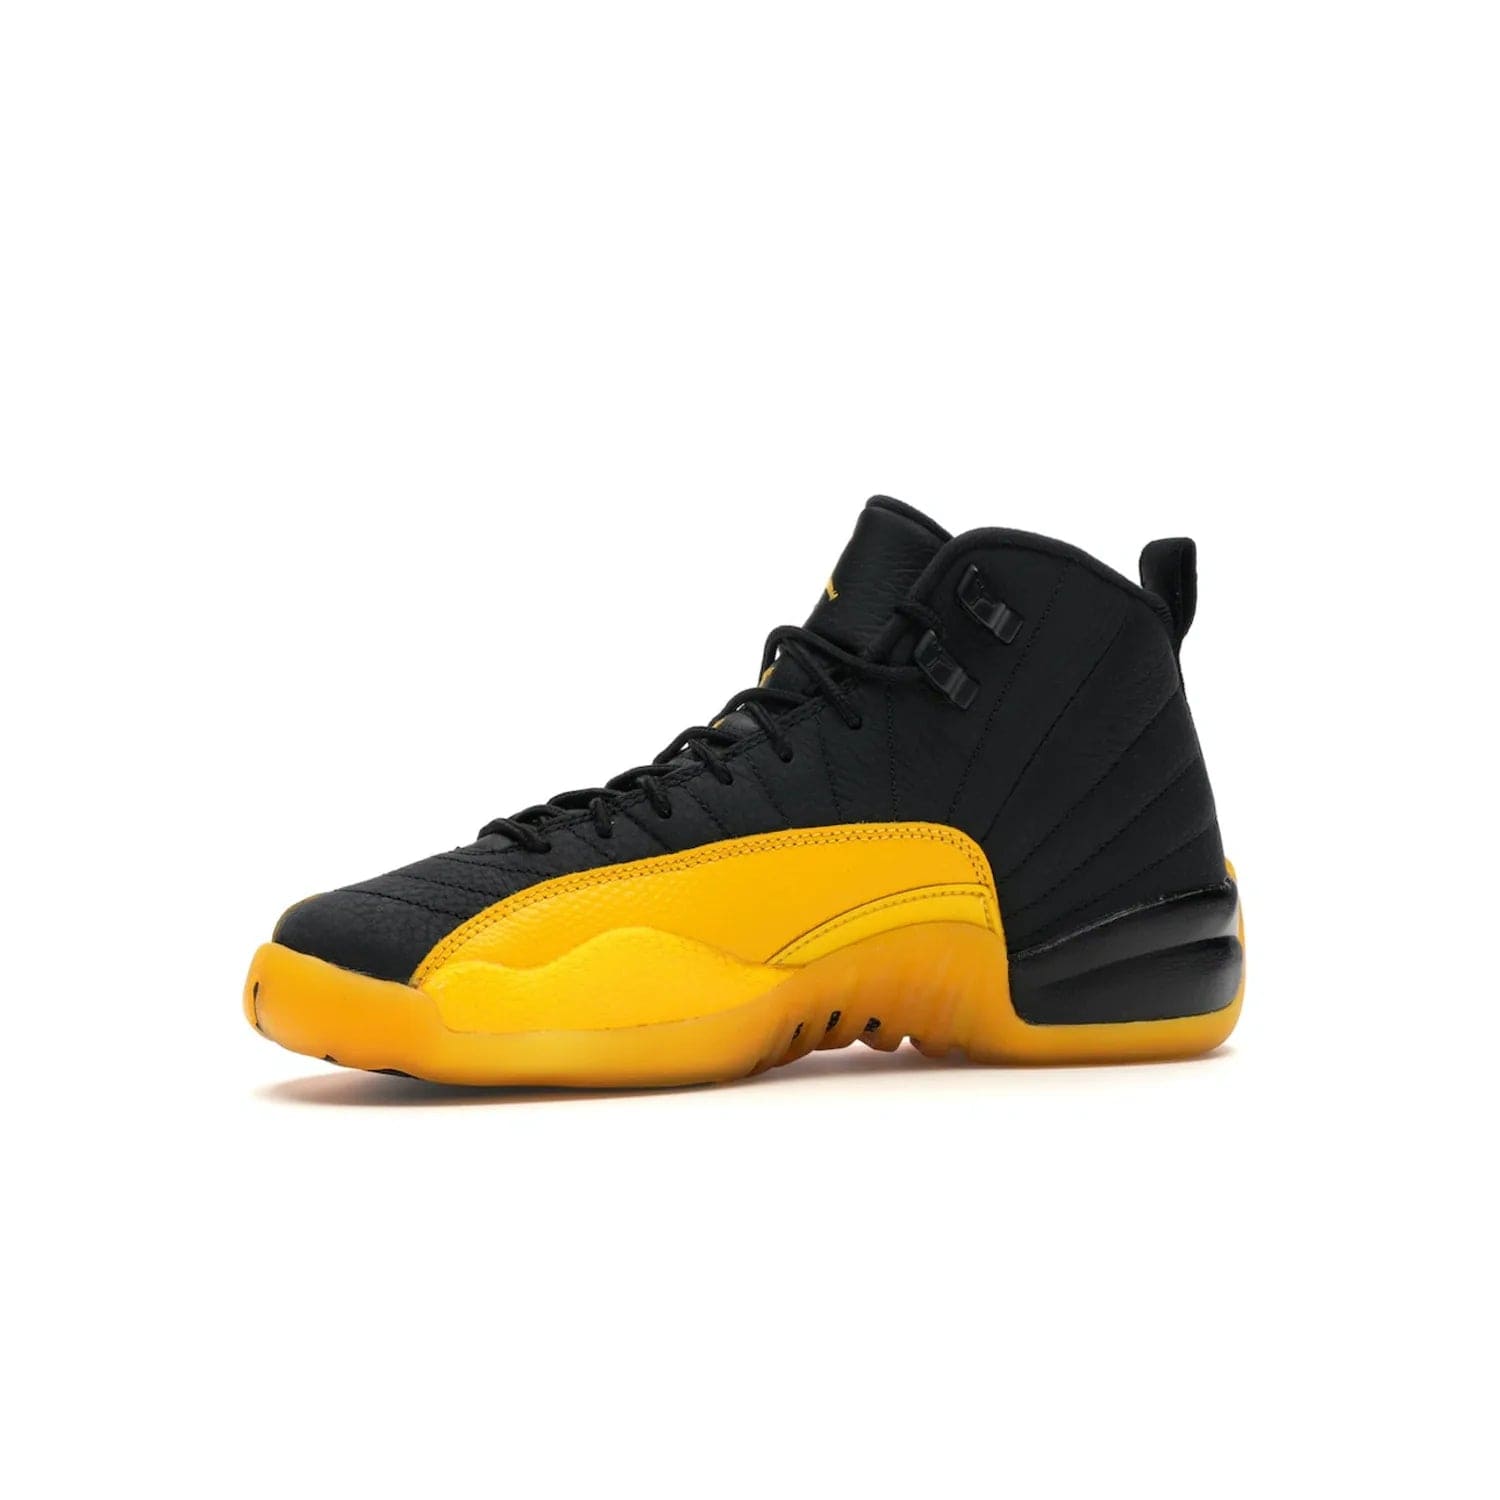 Jordan 12 Retro Black University Gold (GS) - Image 17 - Only at www.BallersClubKickz.com - Upgrade your kid's shoe collection with the Jordan 12 Retro Black University Gold. With classic style, black tumbled leather upper, and University Gold accents, it's a great summer look. Out July 2020.